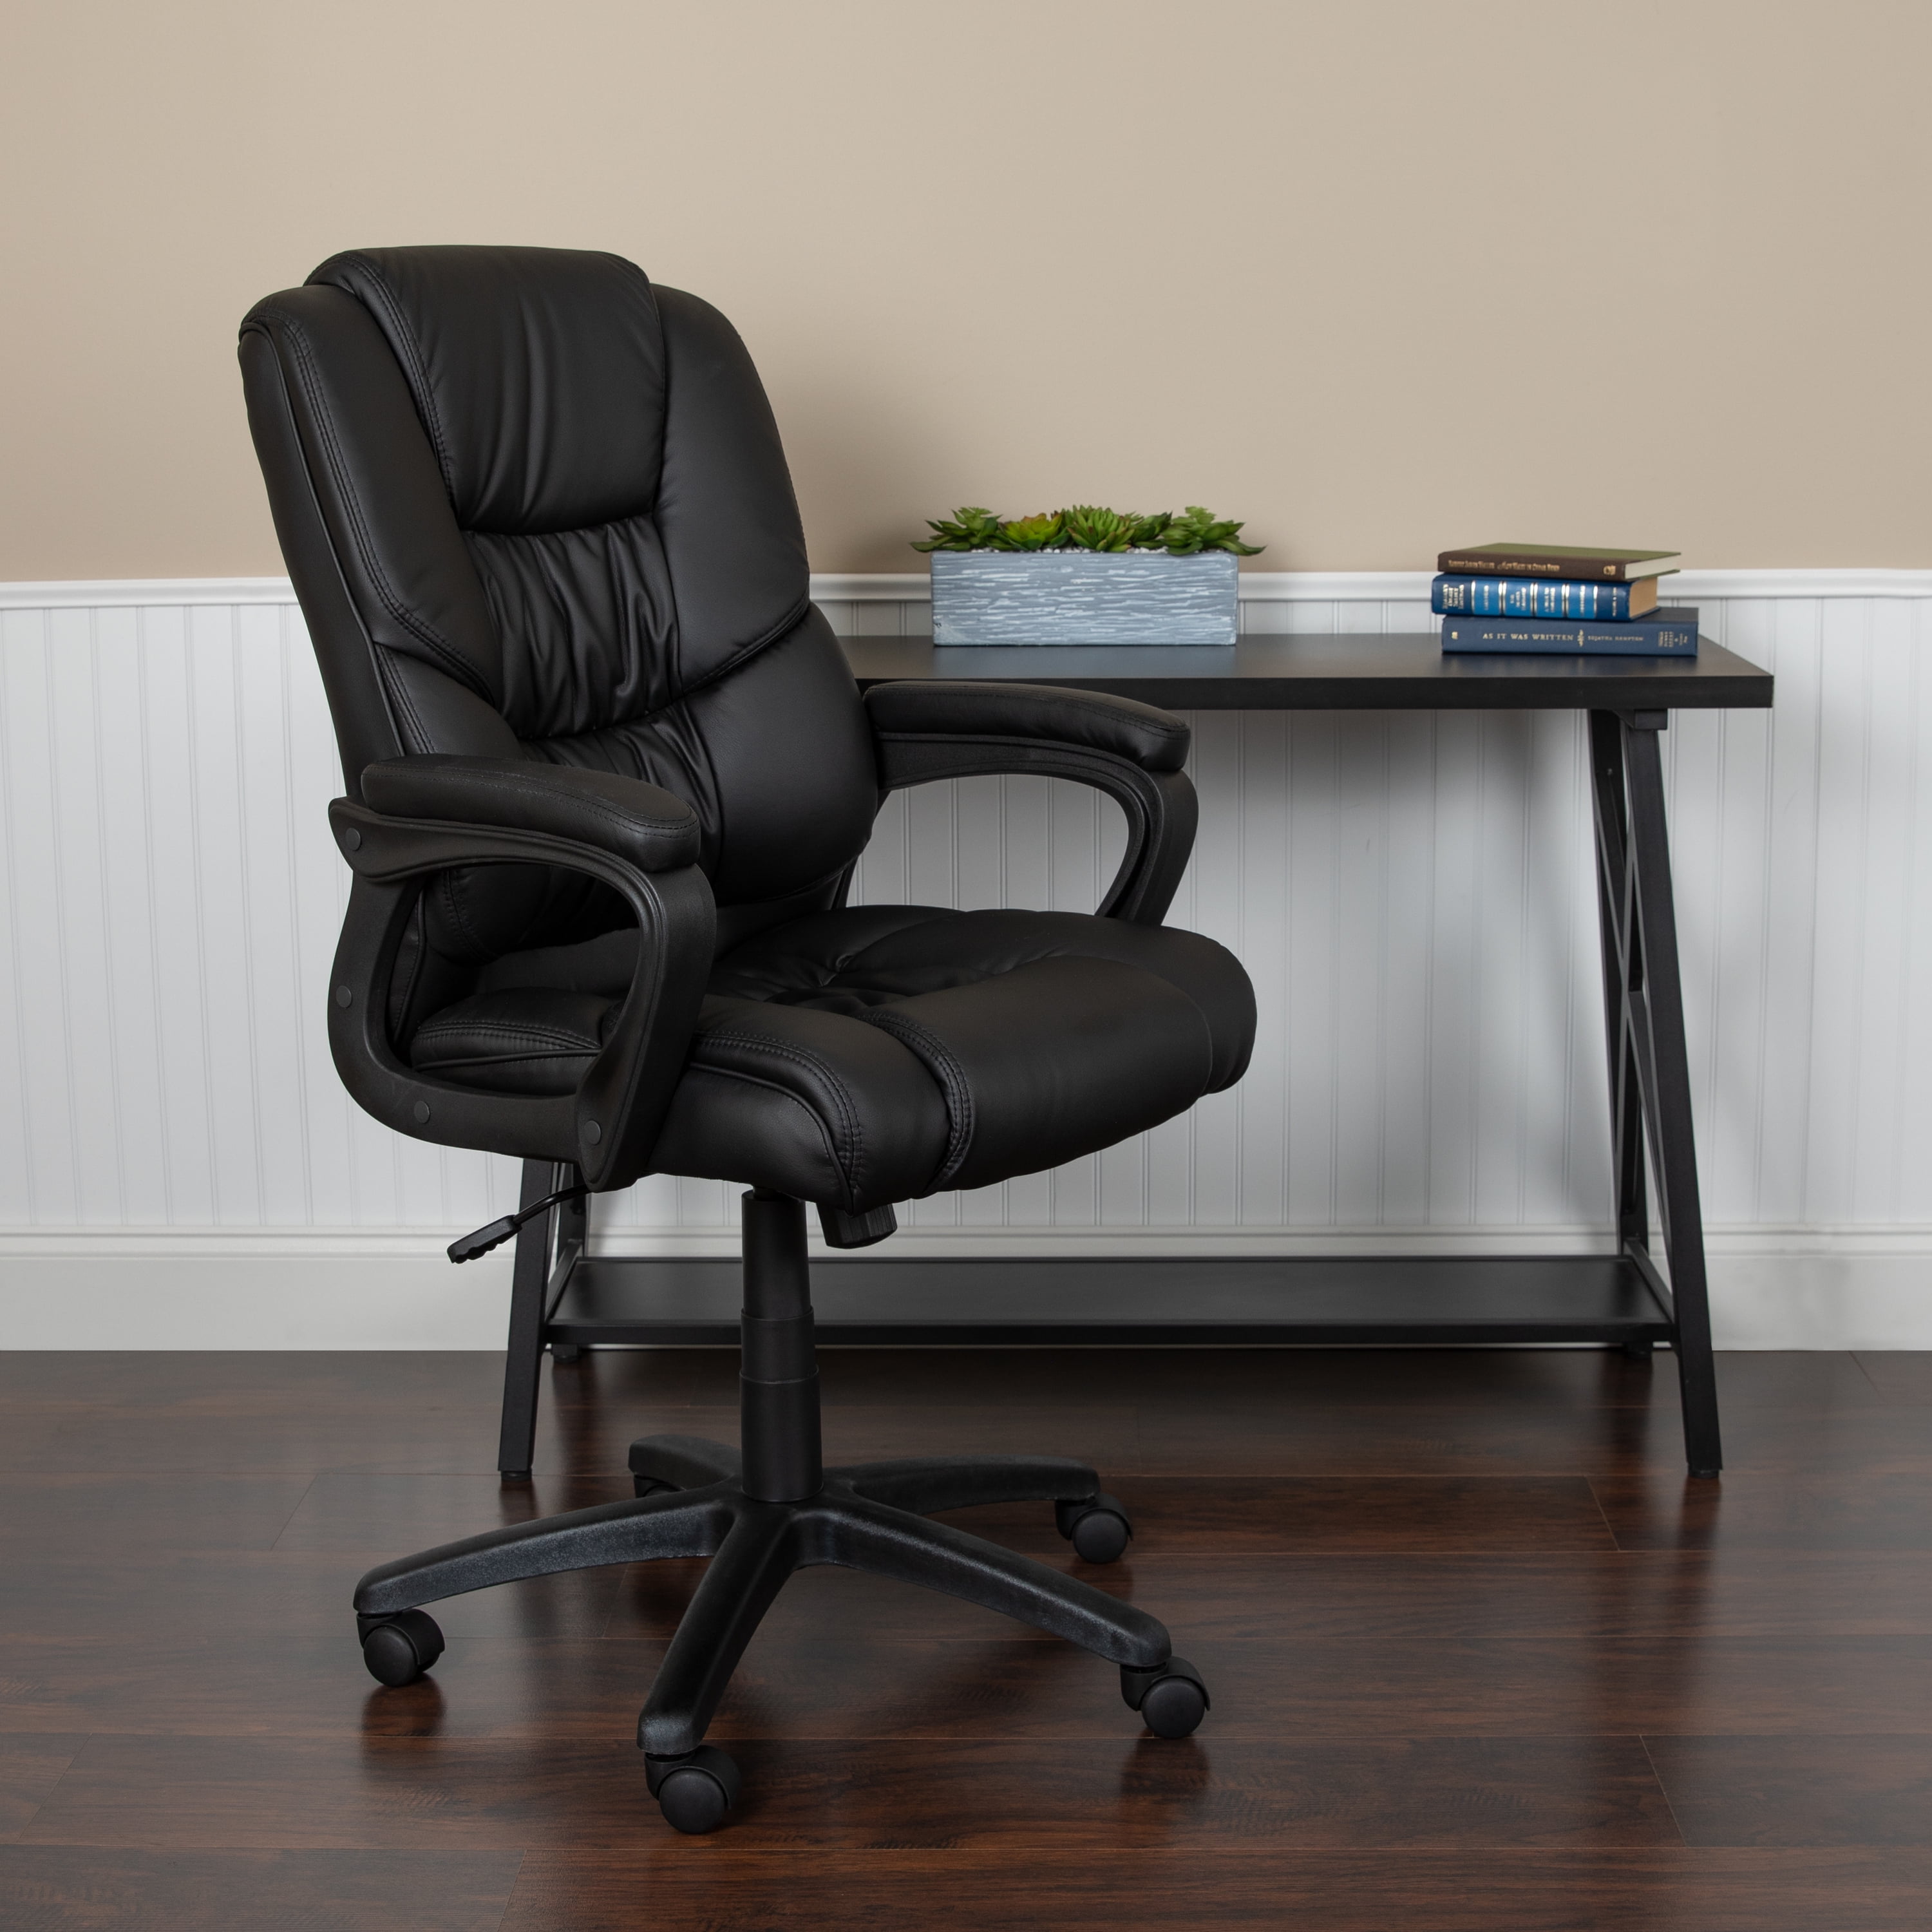 Black Ergonomic Leather Modern Desk Stool 400 LBS with Adjustable Footrest,Standing Desk Chair with Ribbed Mid Back Swivel Rolling Desk Stool. Drafting Chair Tall Office Chair 